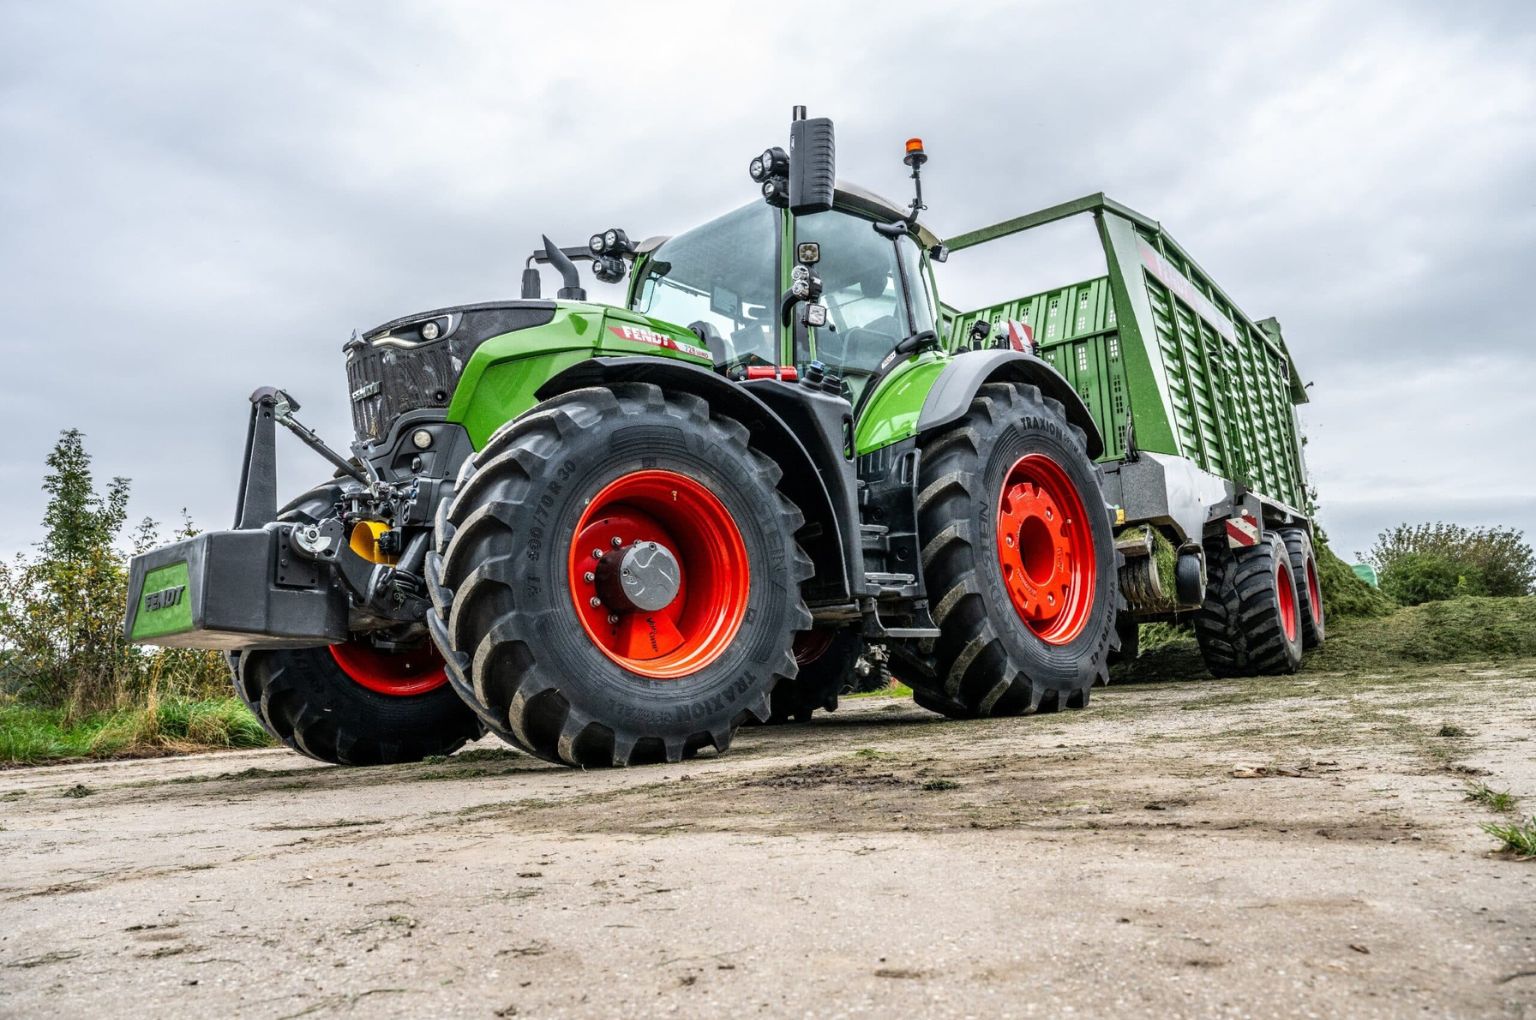 Fendt selects Vredestein tyres